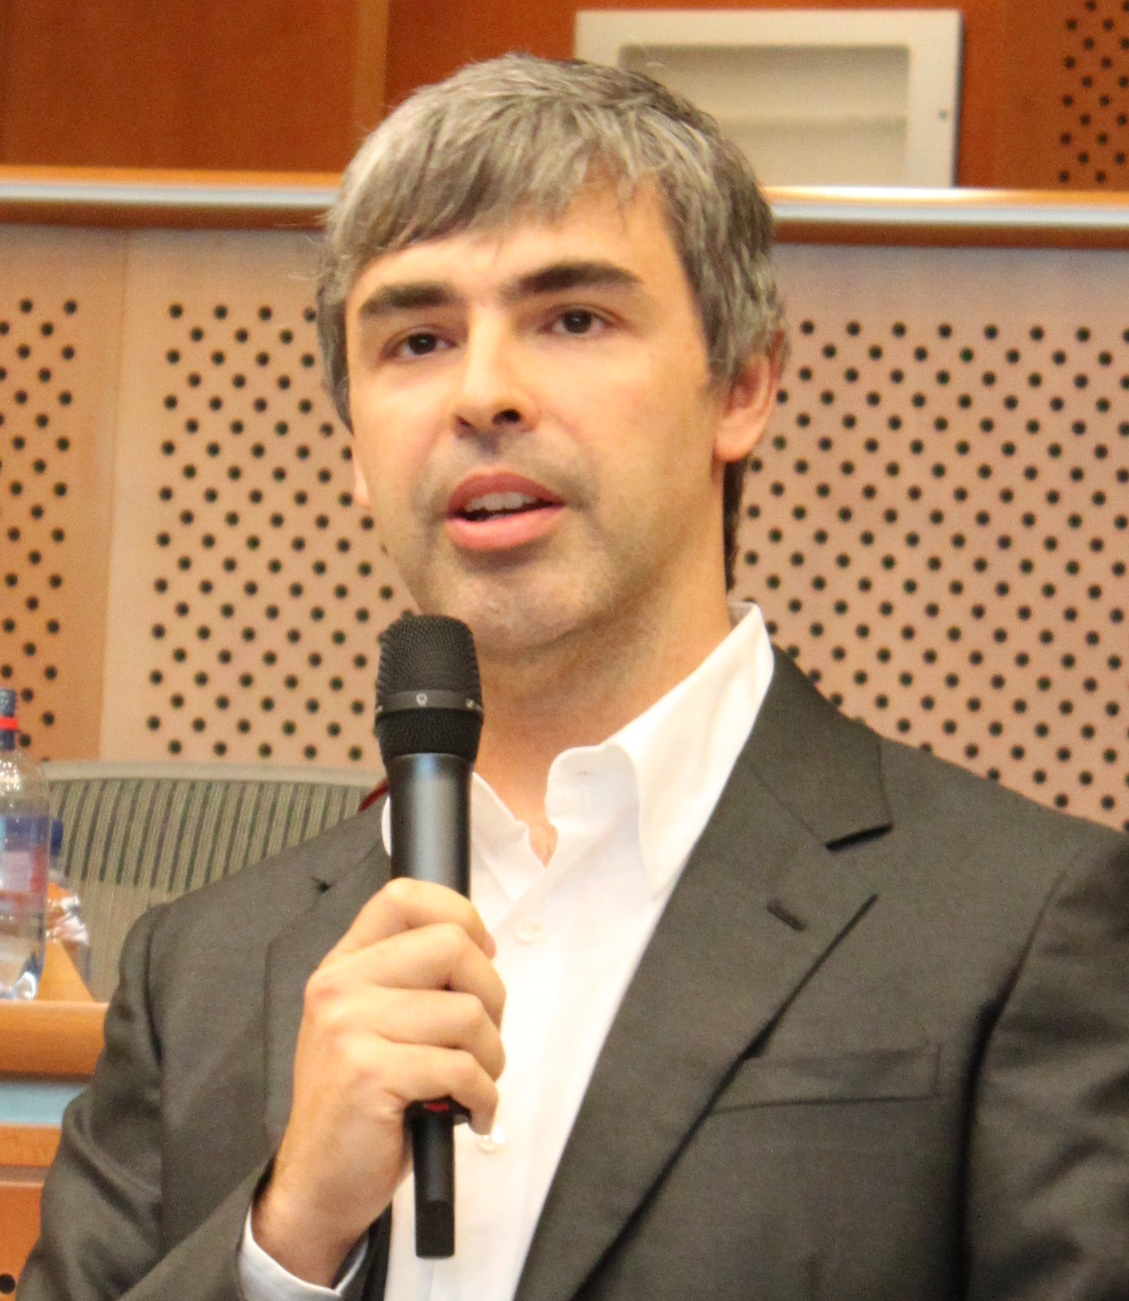 8. Larry Page